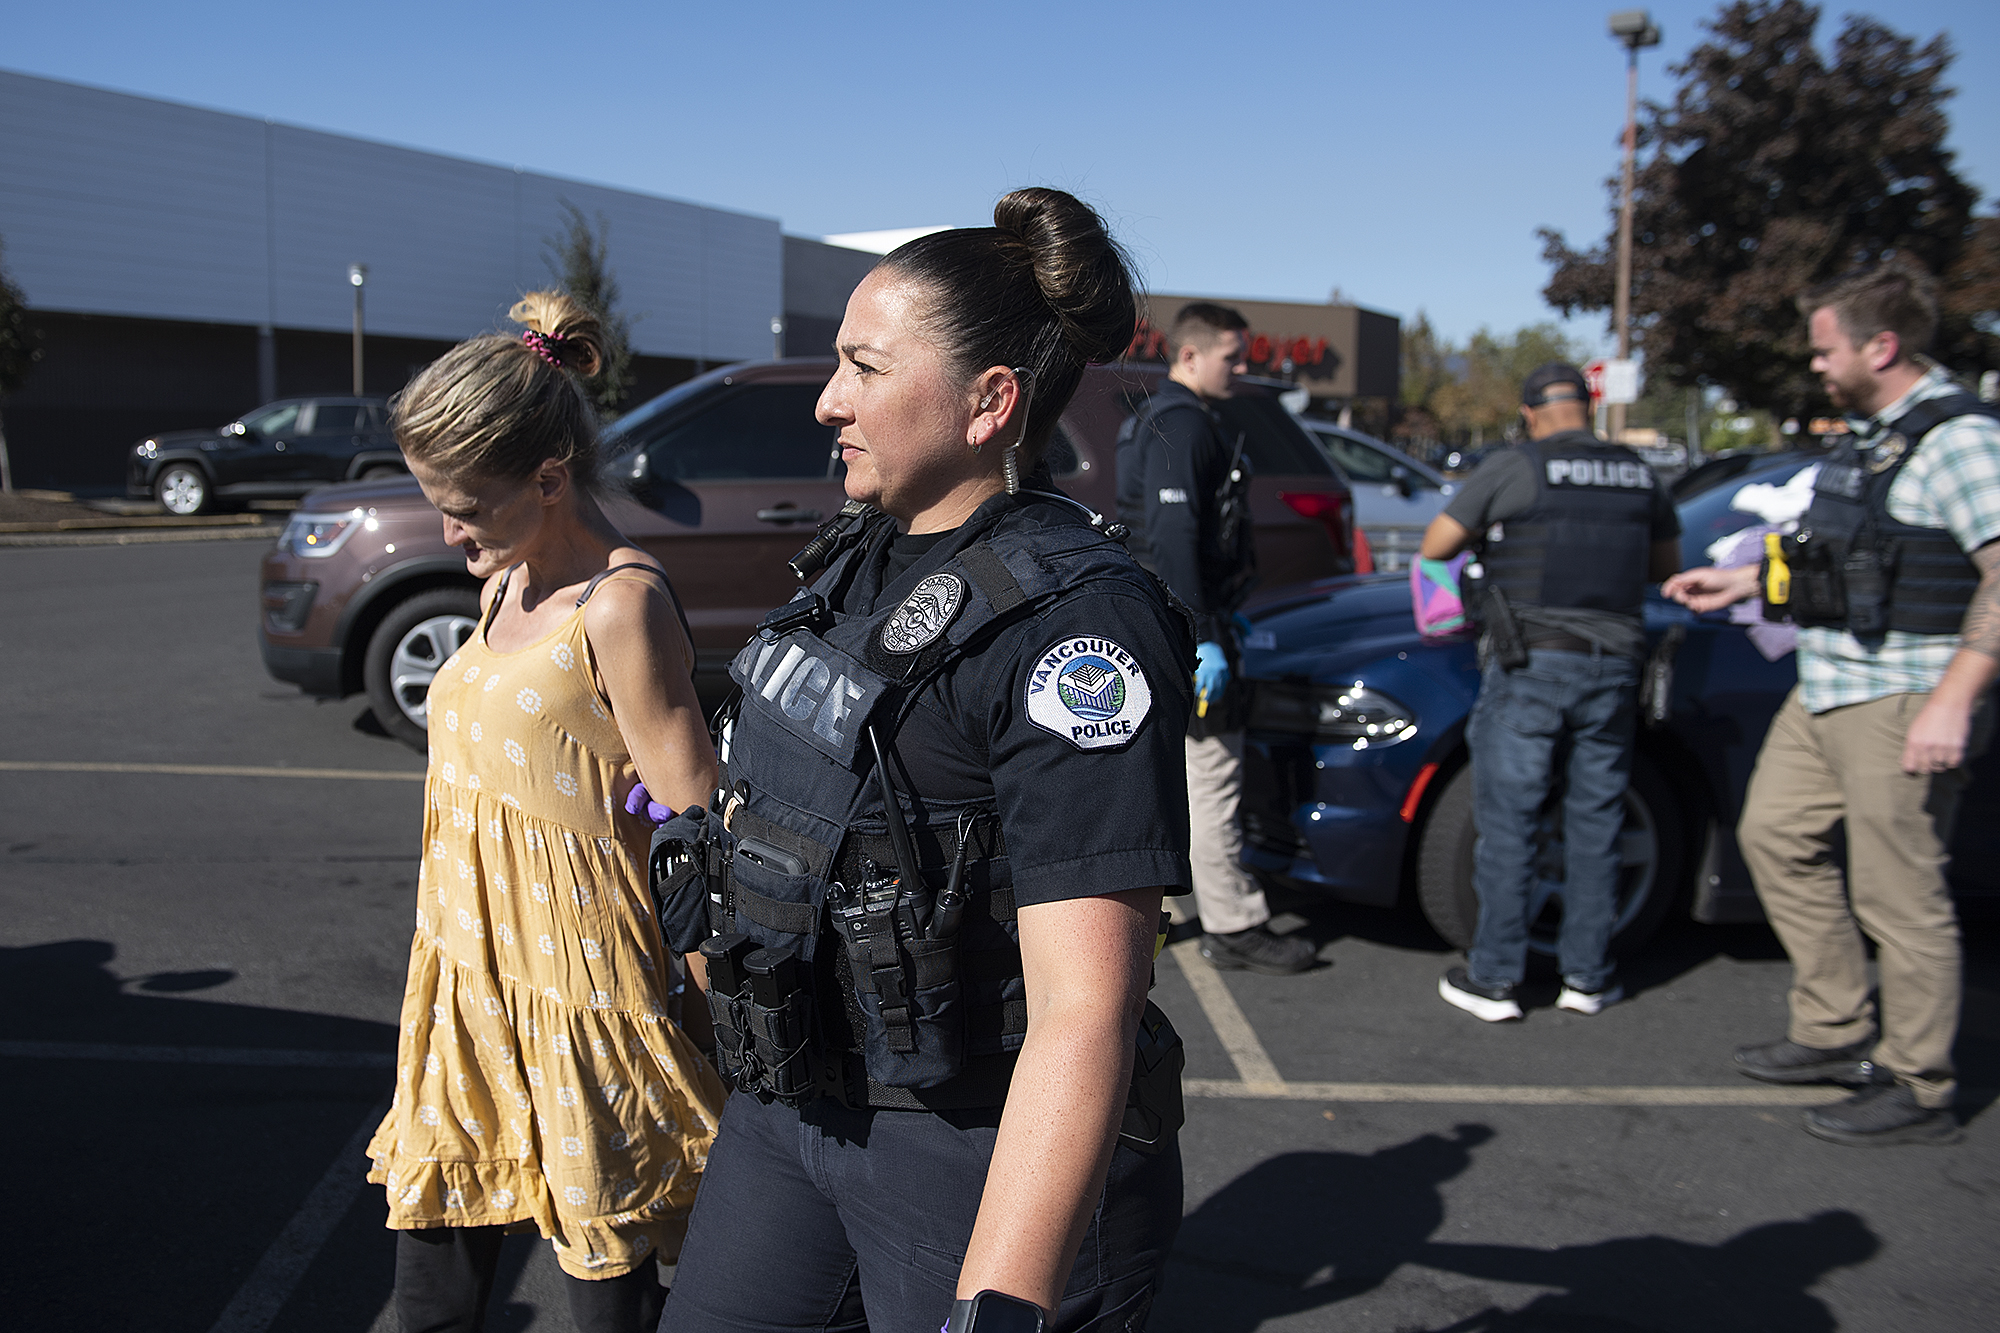 Officer Andrea Mendoza of the Vancouver Police Department escorts a suspected shoplifter into a patrol car at the Fred Meyer store in Cascade Park on Wednesday afternoon, Oct. 12, 2022. The woman was booked and released later in the afternoon. The agency says this is a growing problem and has begun patrol shifts emphasizing on retail theft.